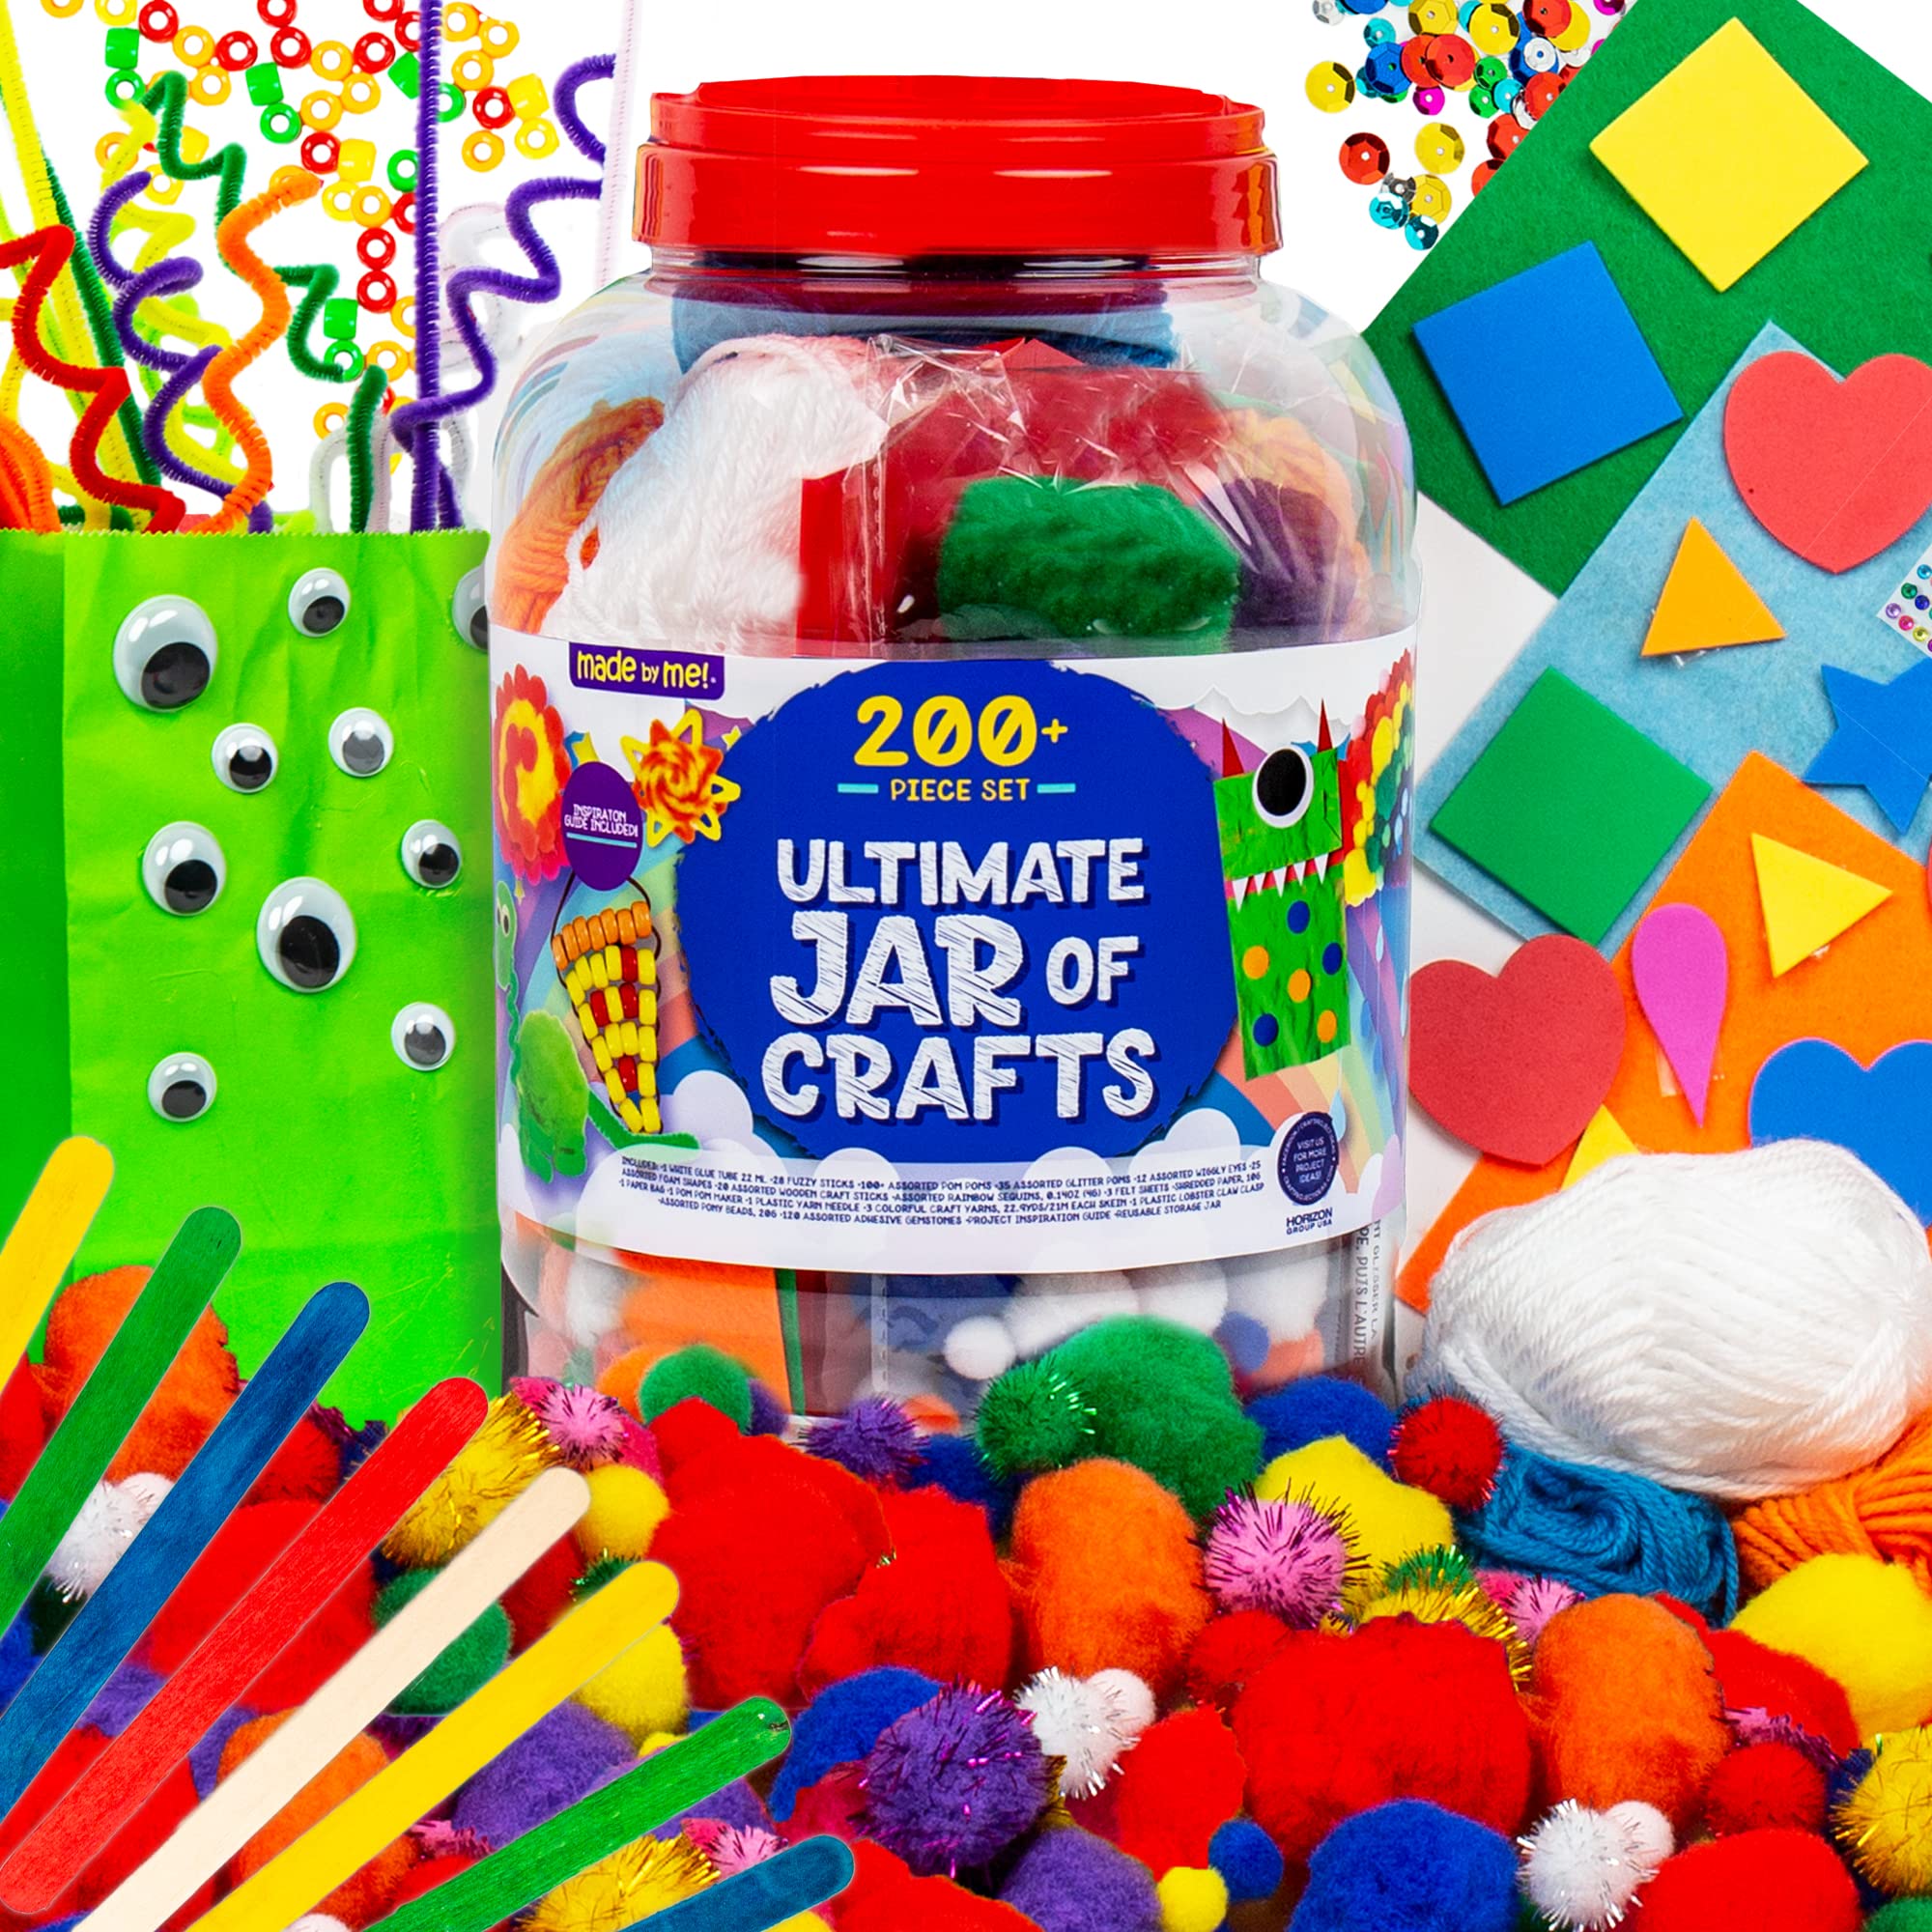 Made By Me! Ultimate Jar of Crafts, 200+ Piece Rainbow Craft Supply Bundle, Craft Supplies Starter Kit, Great Arts & Crafts Kit for Travel On-The-Go, Perfect for Kids Adults Ages 5, 6, 7, 8, 9, Multi